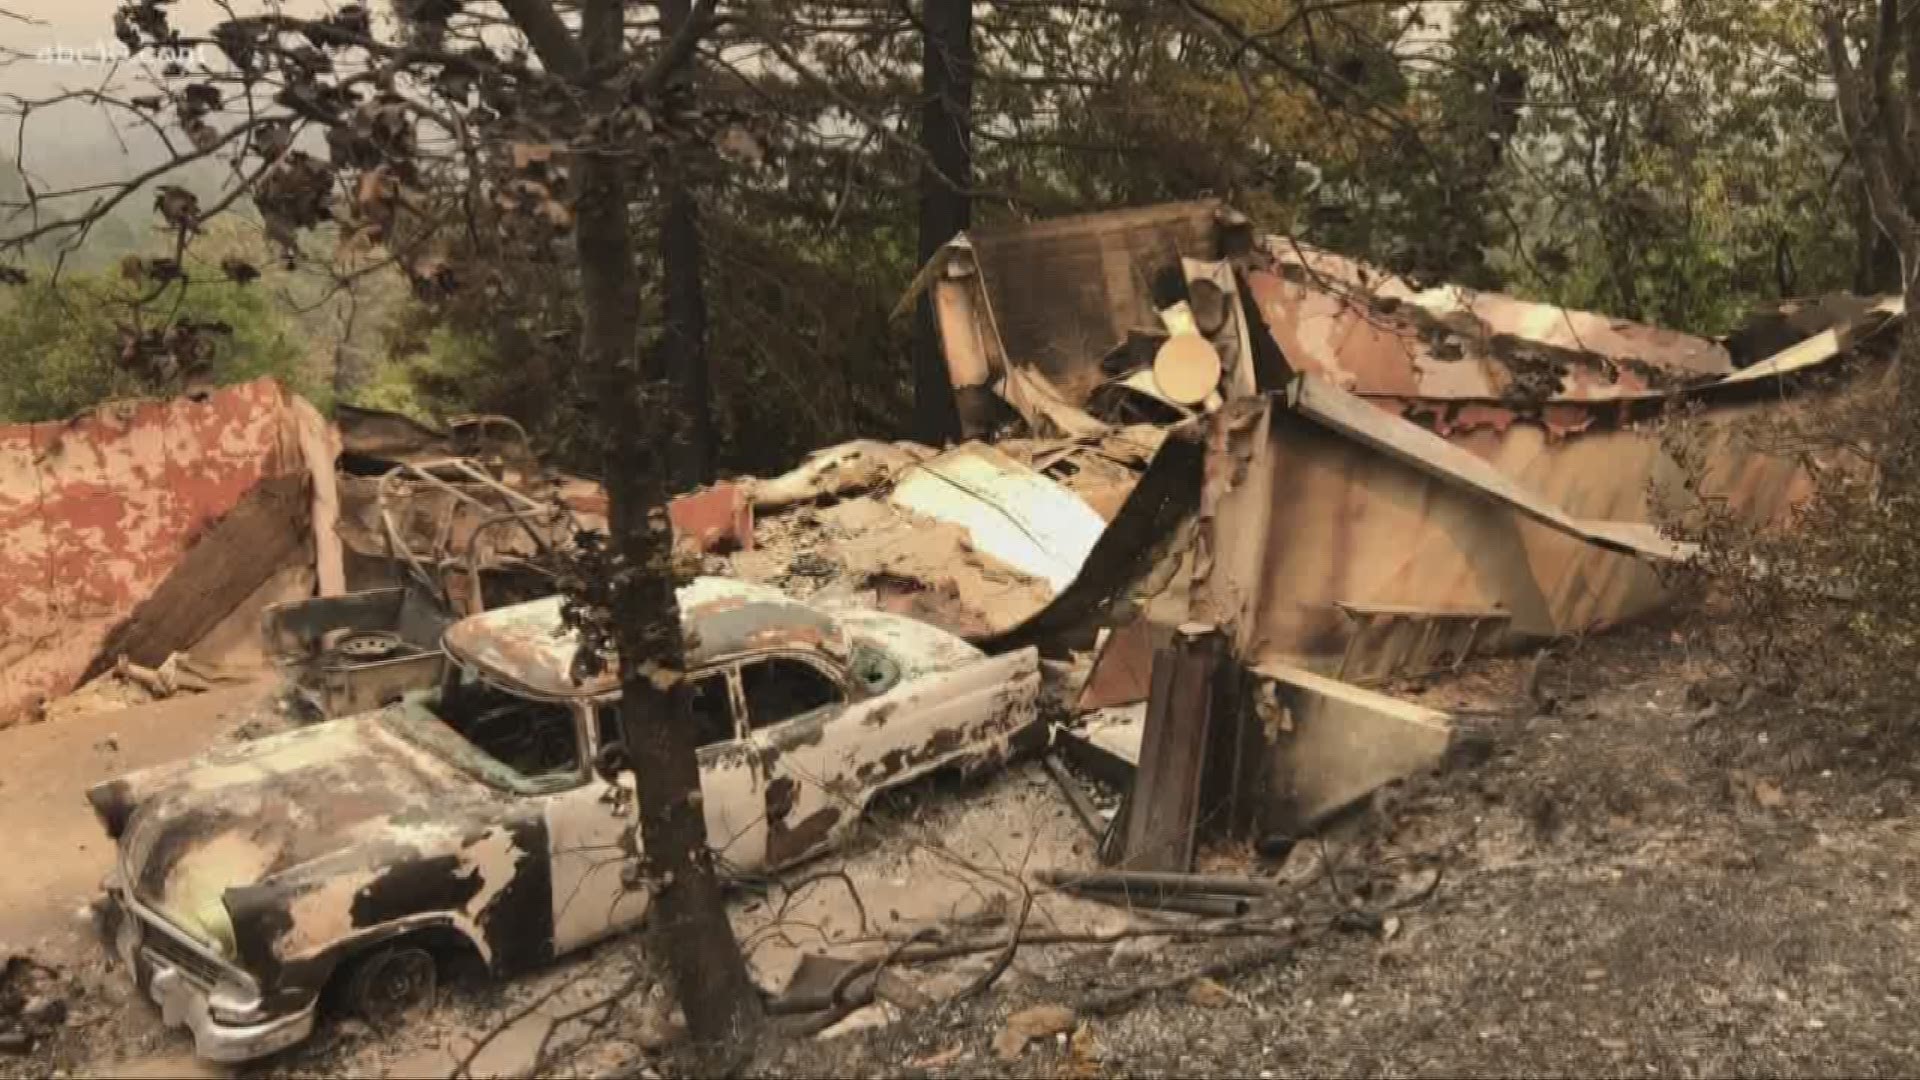 The Carr Fire burning through Shasta County, which has resulted in six deaths, has become the ninth-most destructive fire in state history.